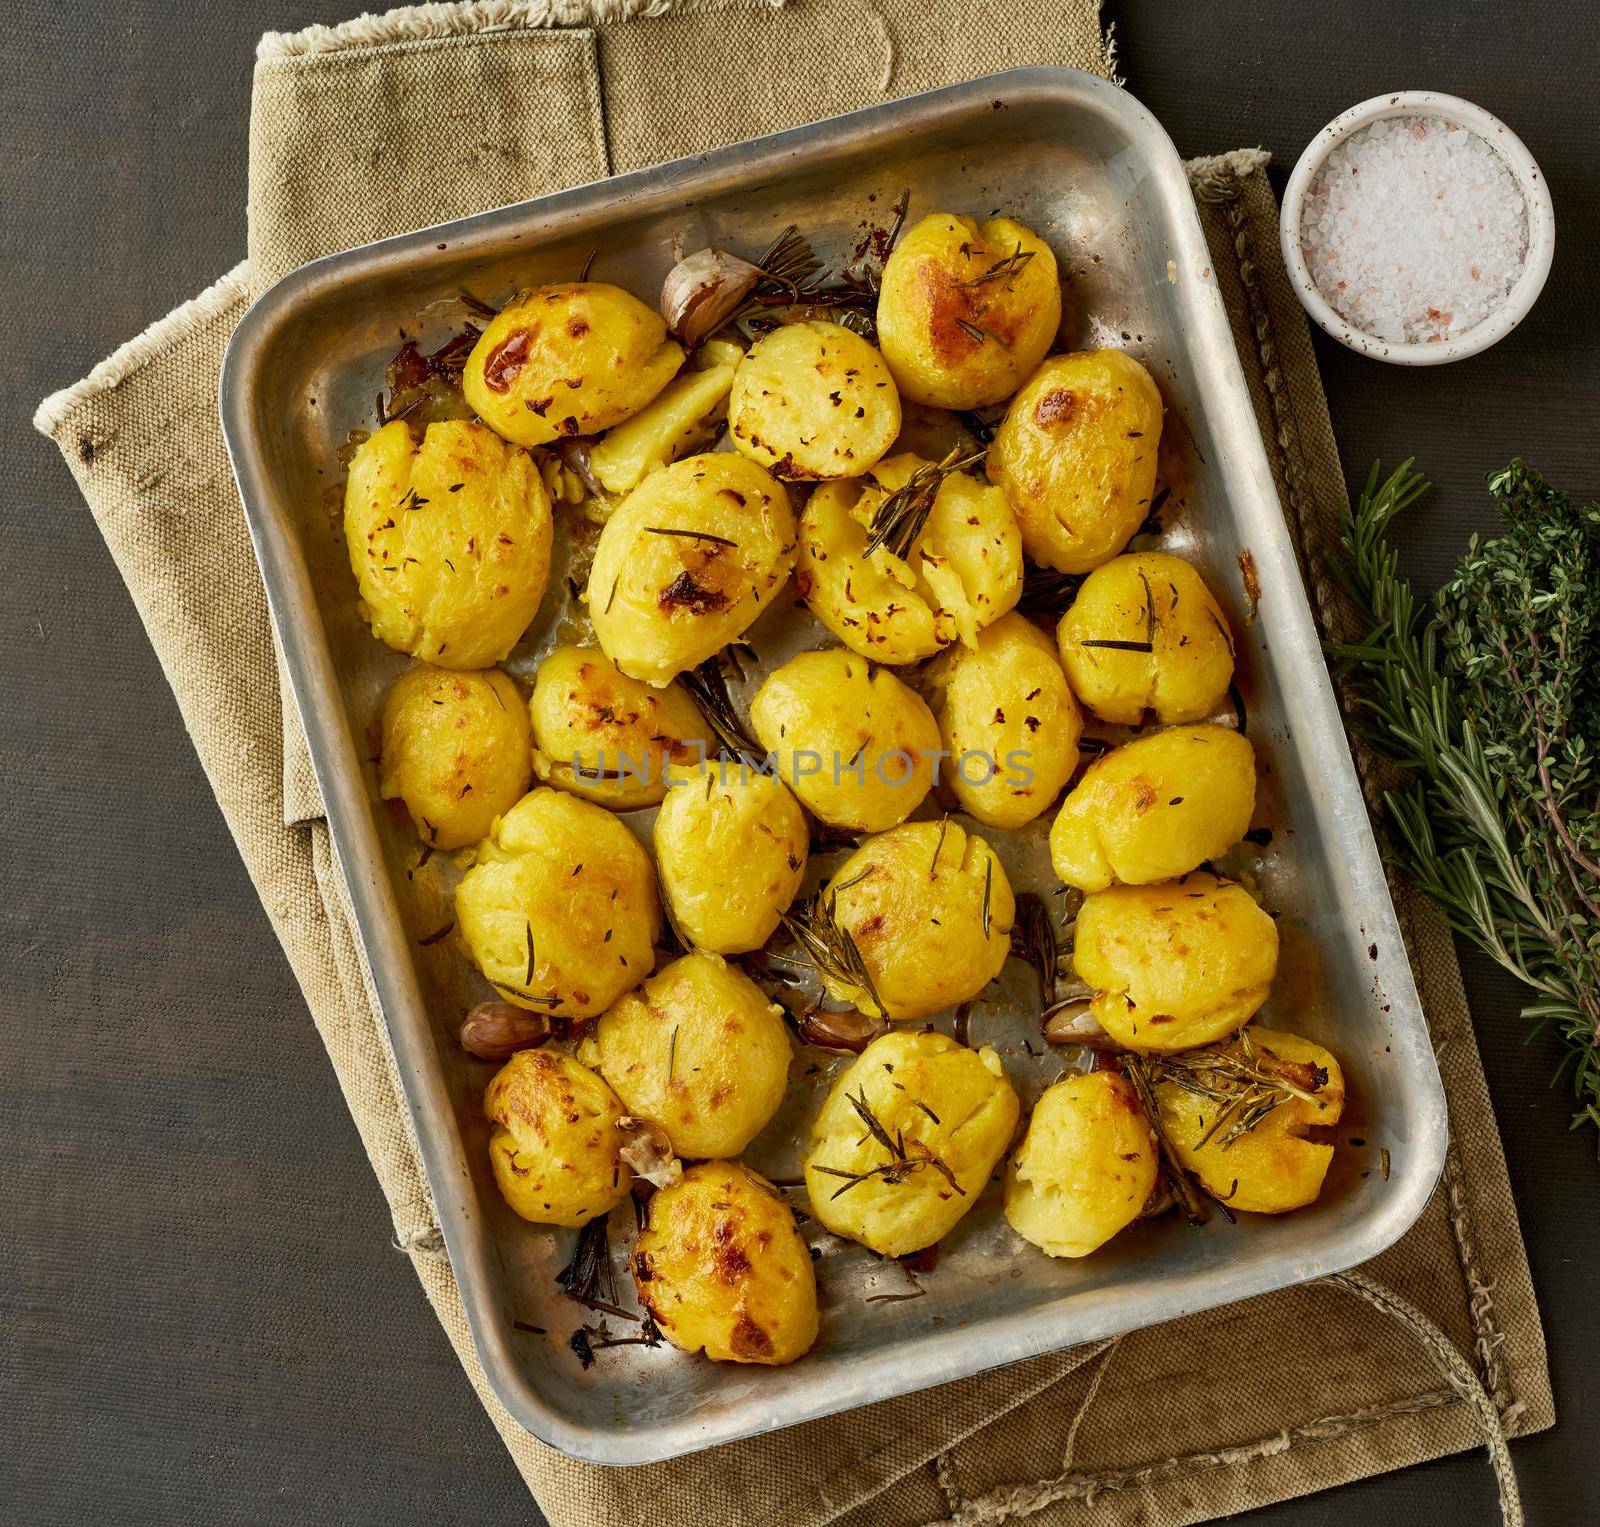 Oven baked whole crushed and crusty potato spuds with seasoning and herbs in metalic tray. Roasted smashed potatoes. Top view. Dark rustic table.